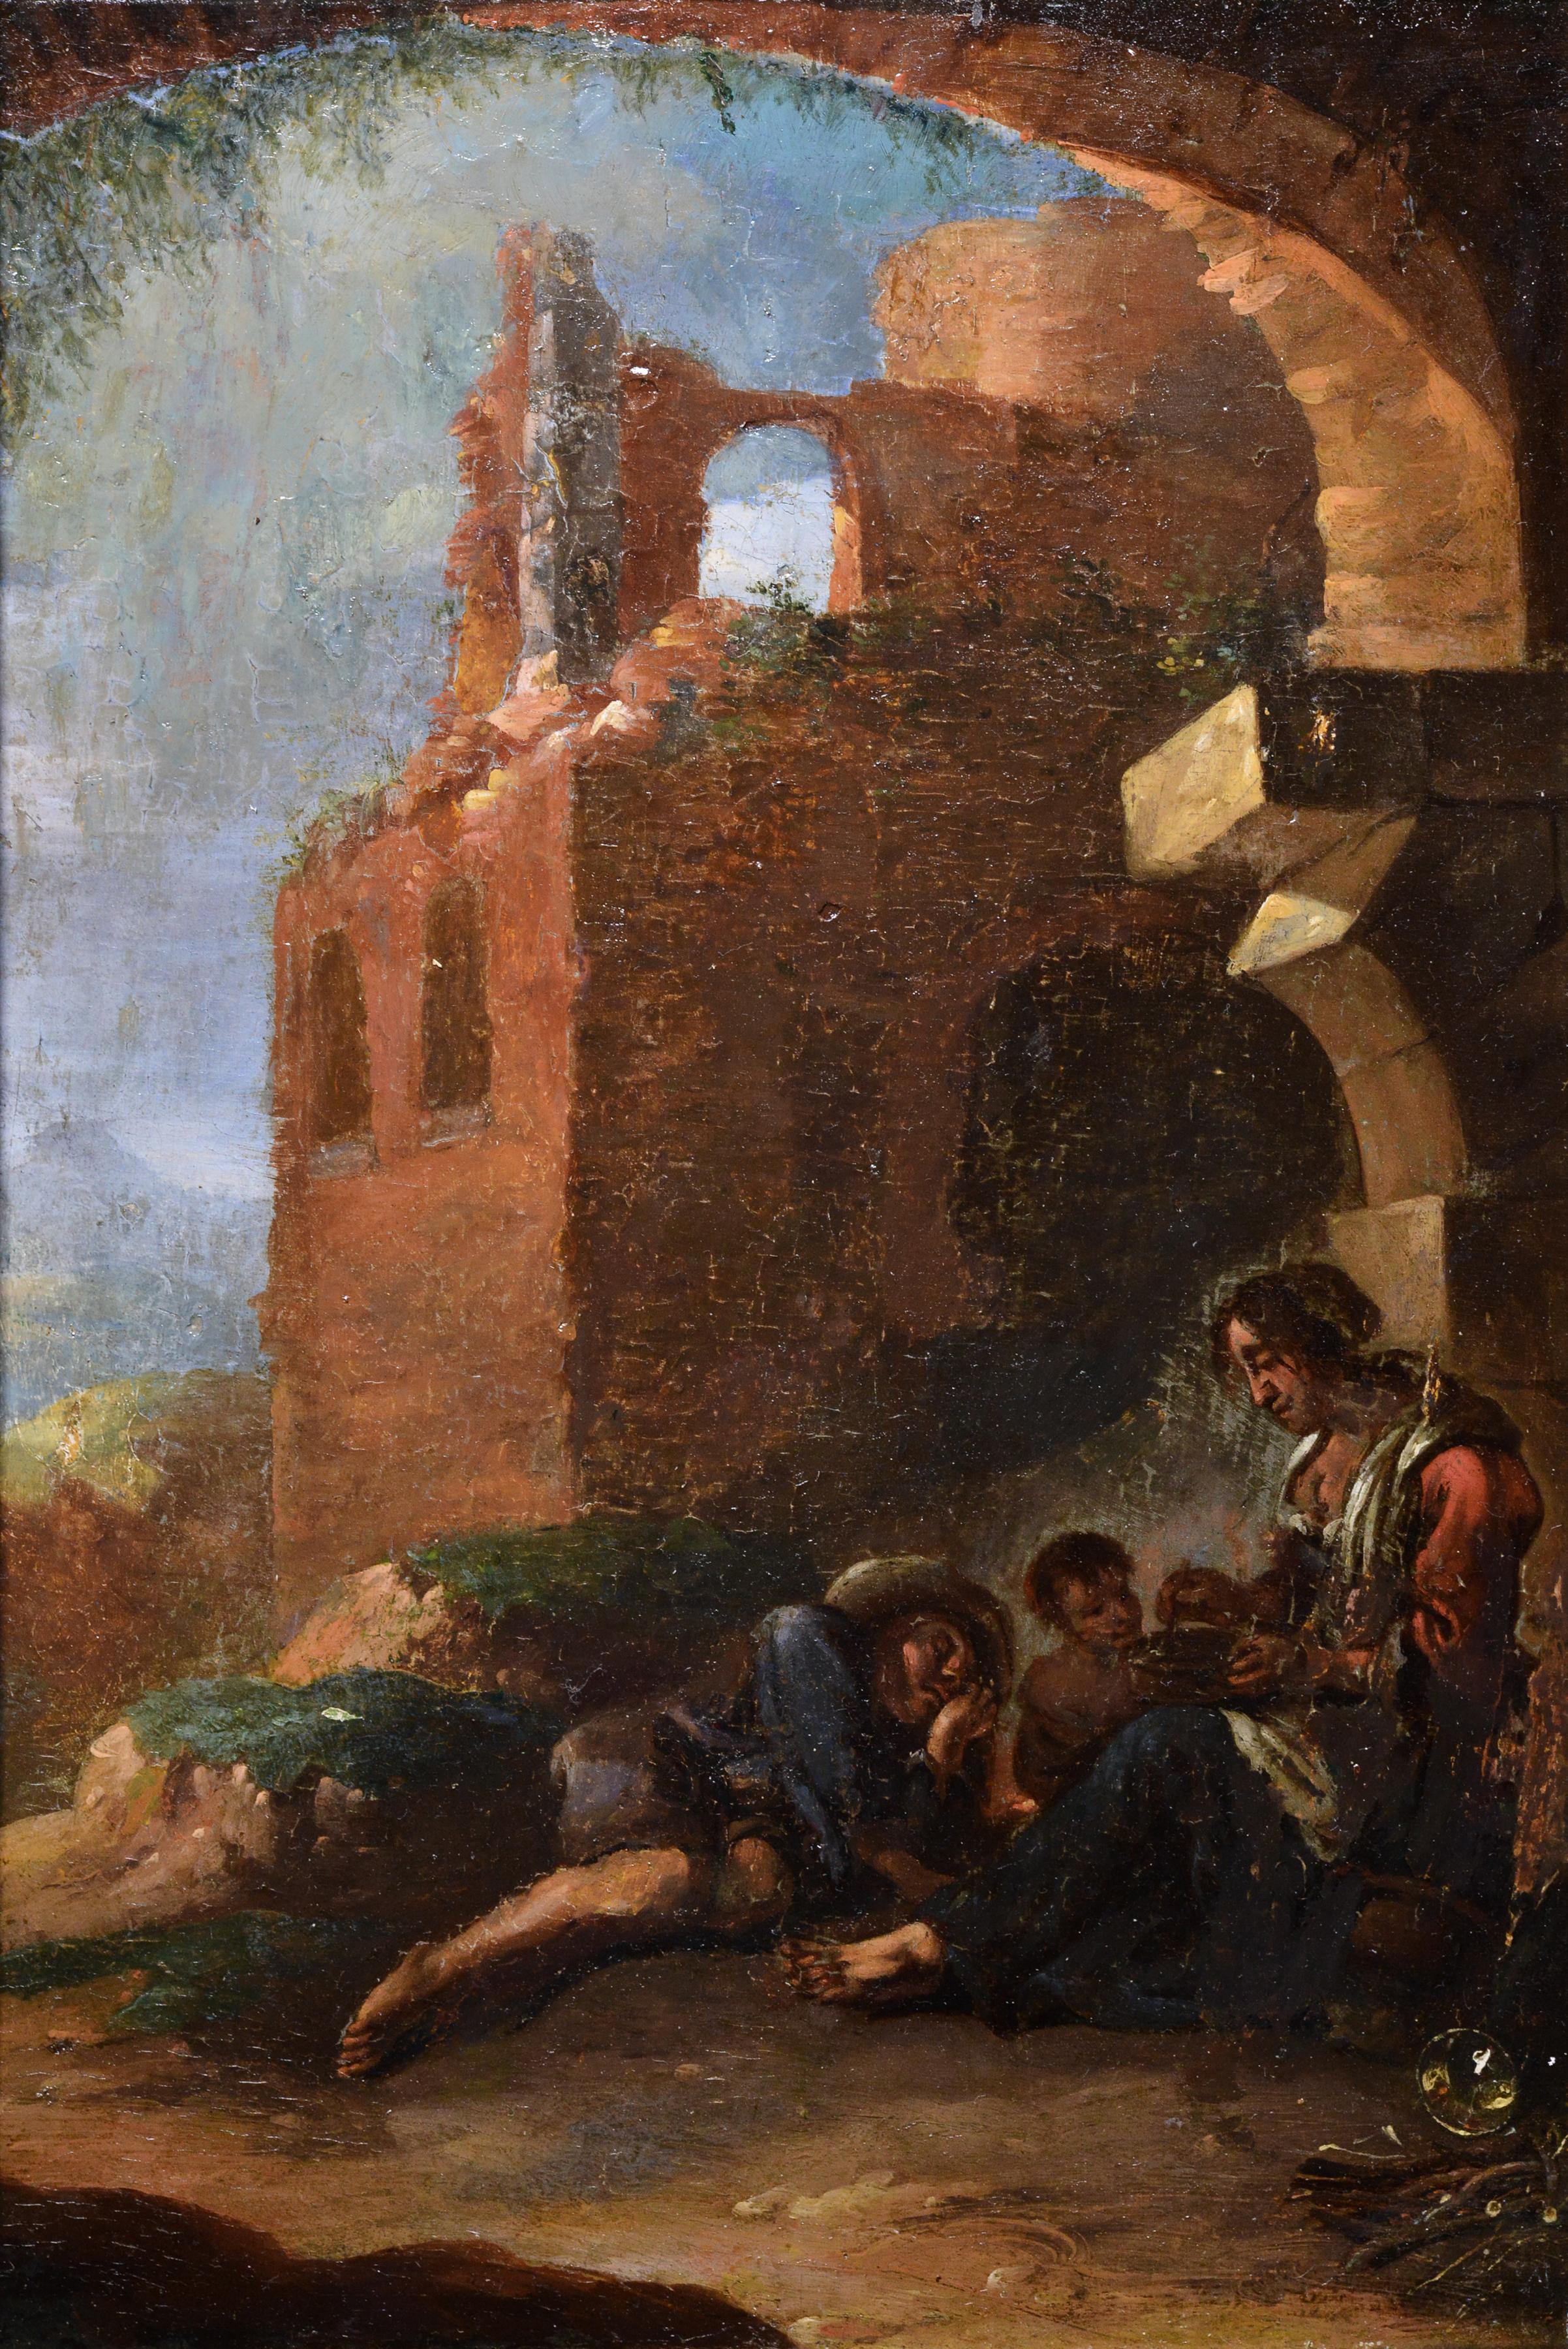 Very well executed mid-18th century artwork, rather oil study, depicts resting family sheltering from the scorching midday sun in grotto shape arch in ruined part of town. Mother feeding the child and the man sleeps deeply. It is difficult to say